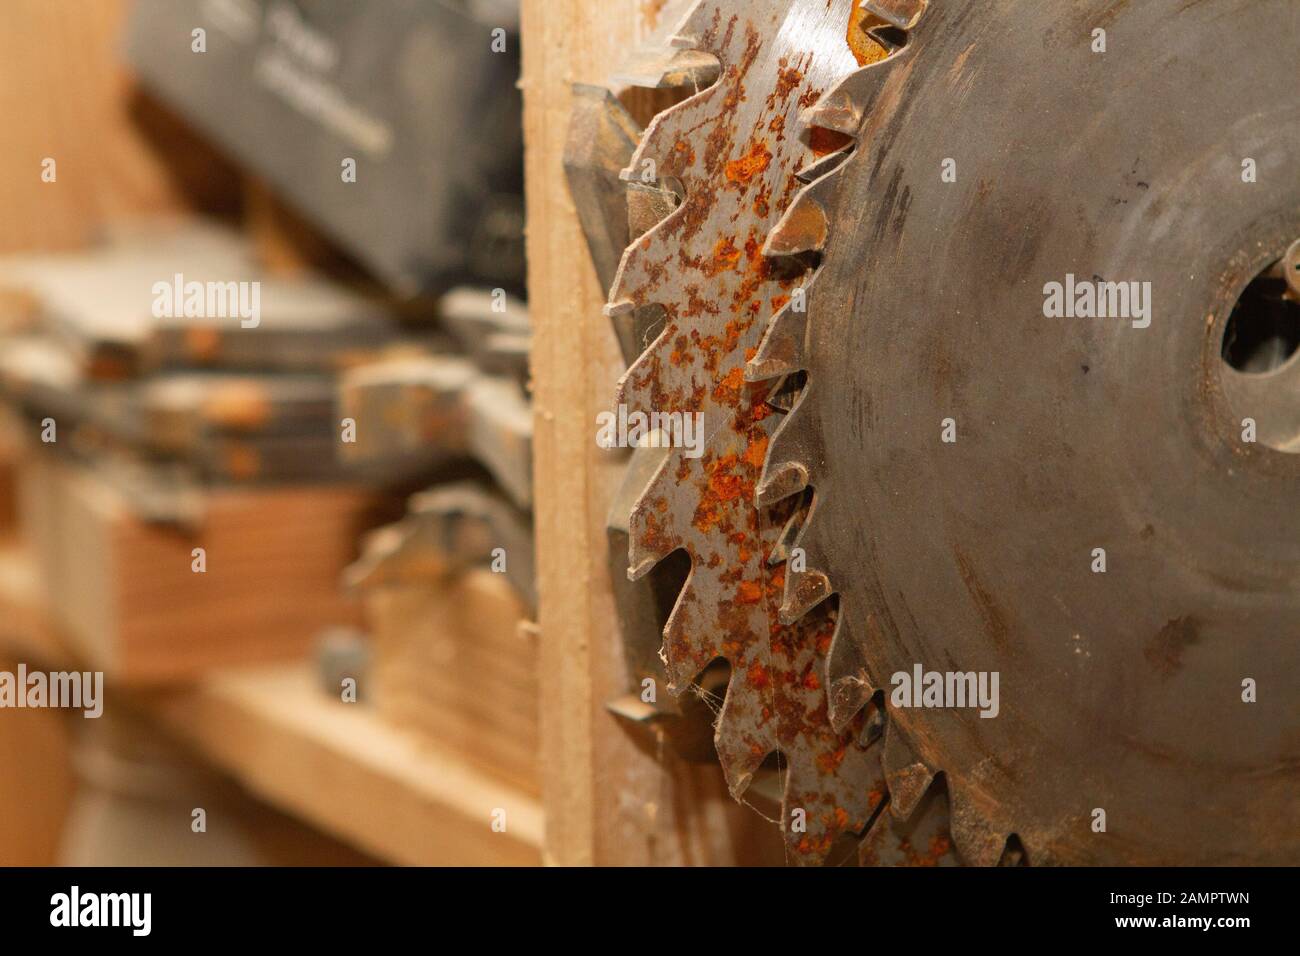 tools for the production of wooden furniture, carpentry shop work Stock Photo